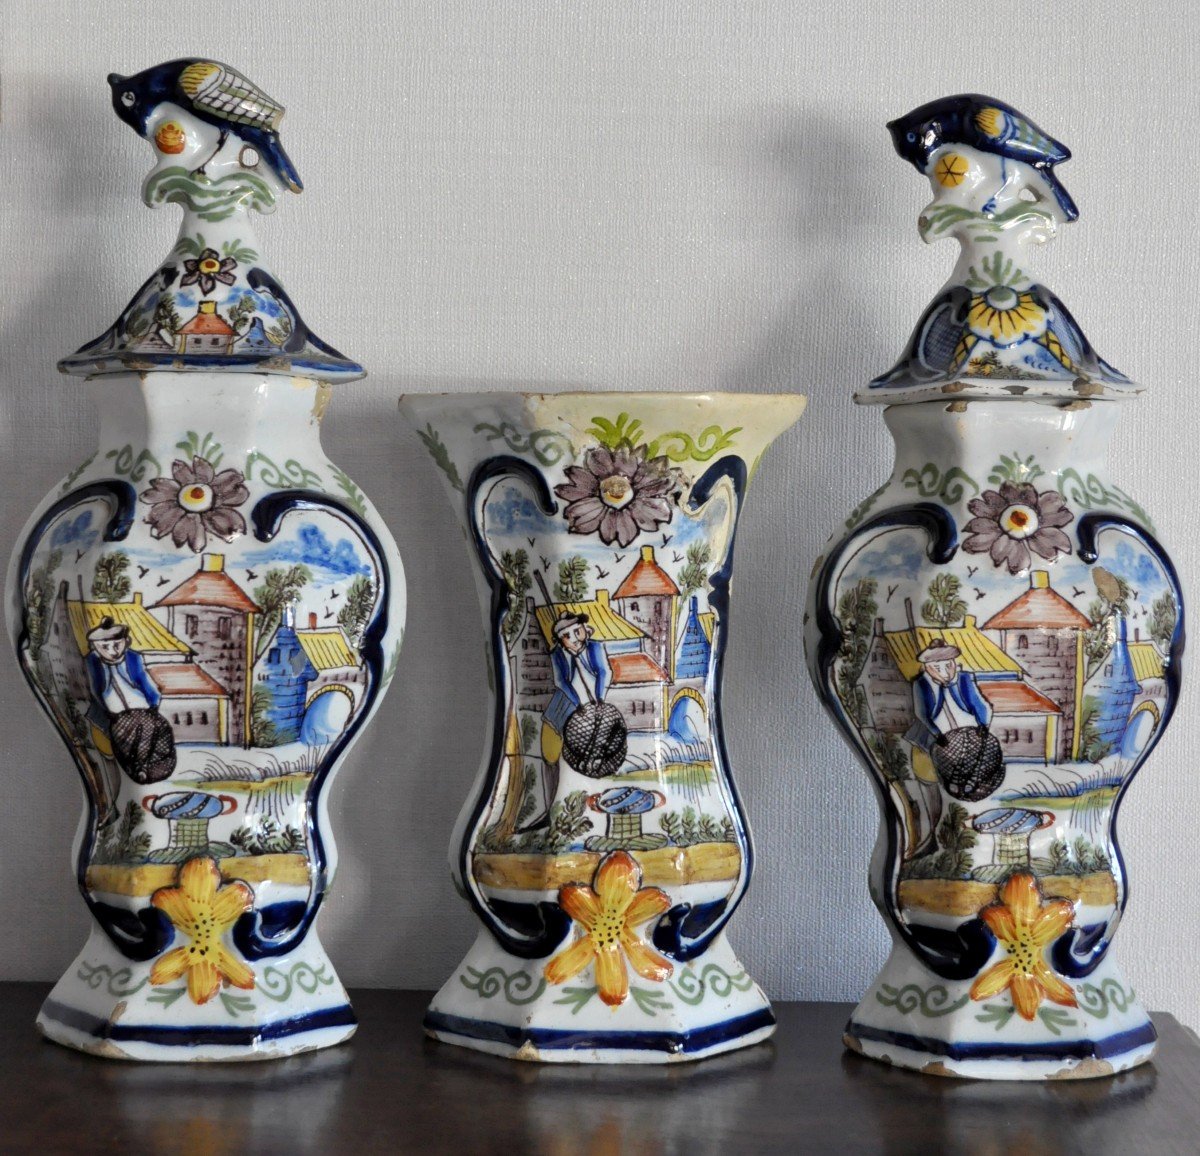 Series Of 3 Pieces In Delft Earthenware - Signed